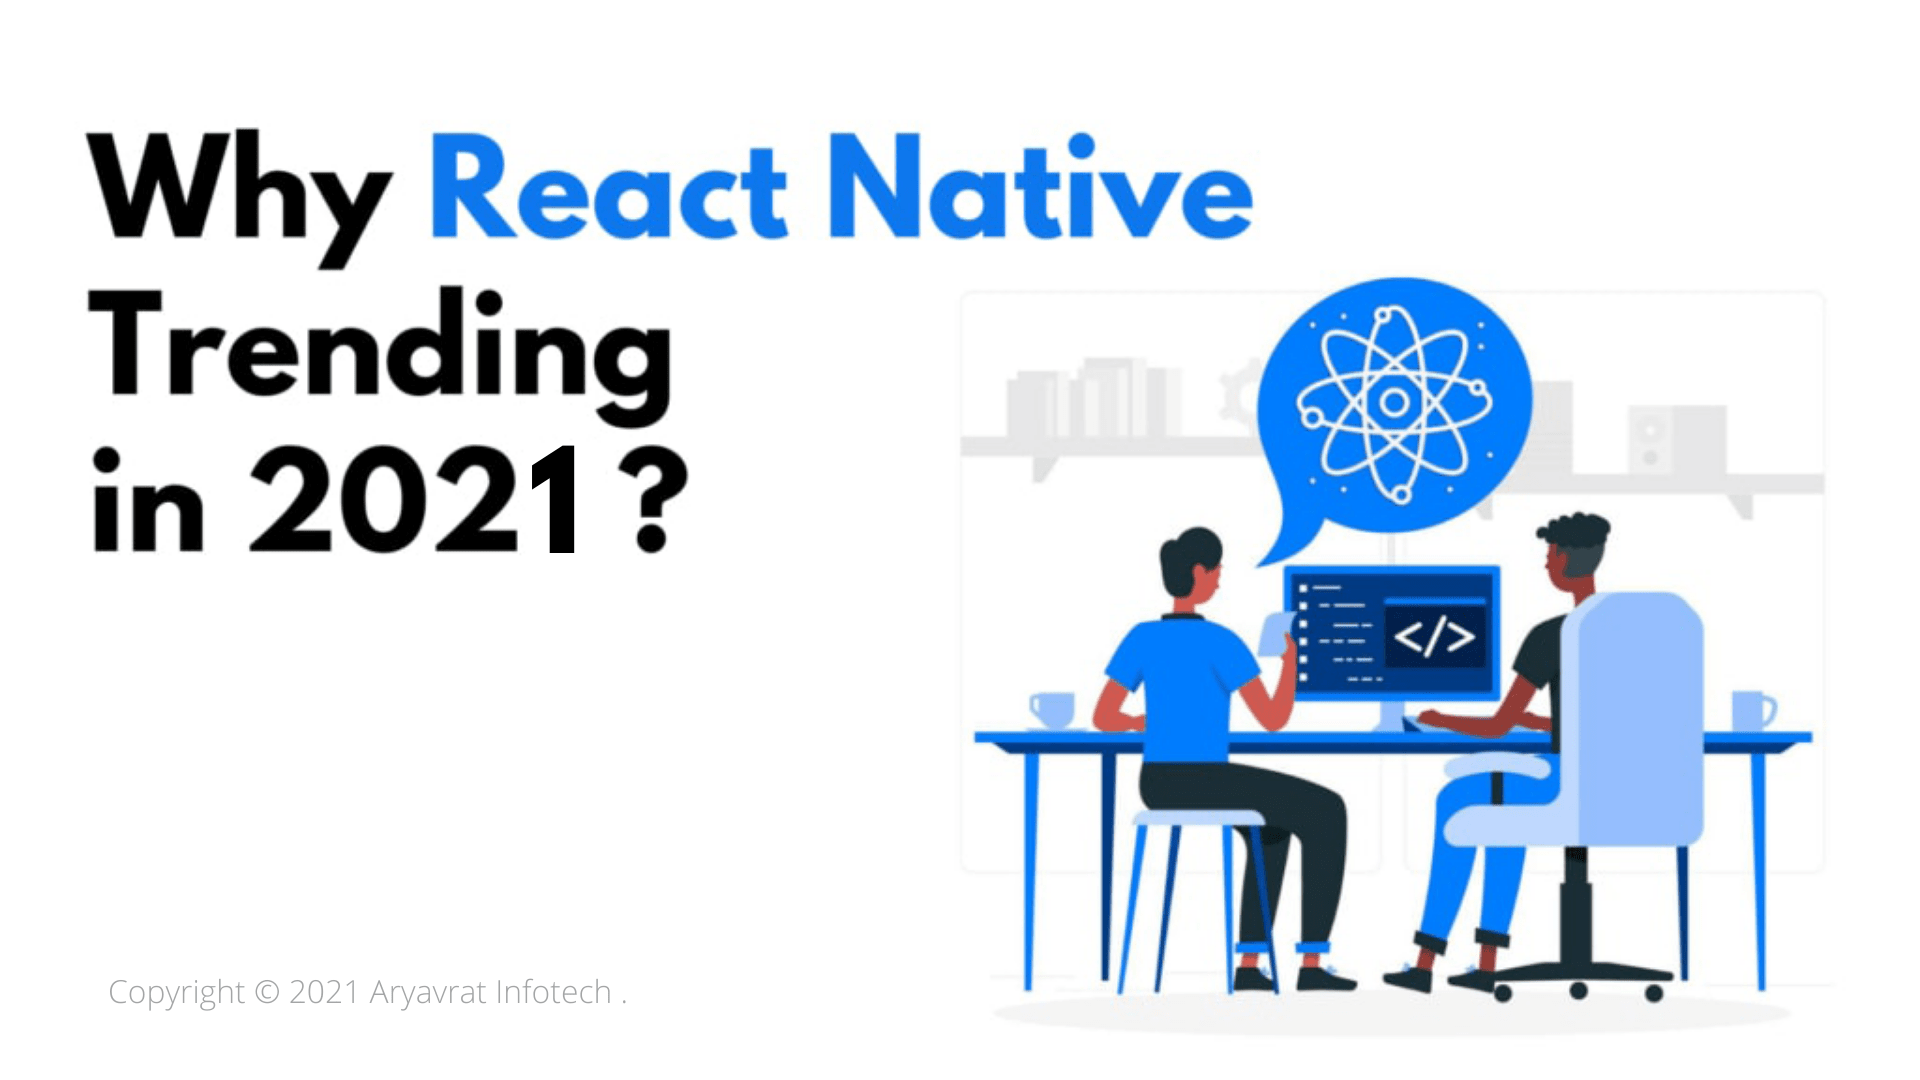 Why React Native Trending in 2021?